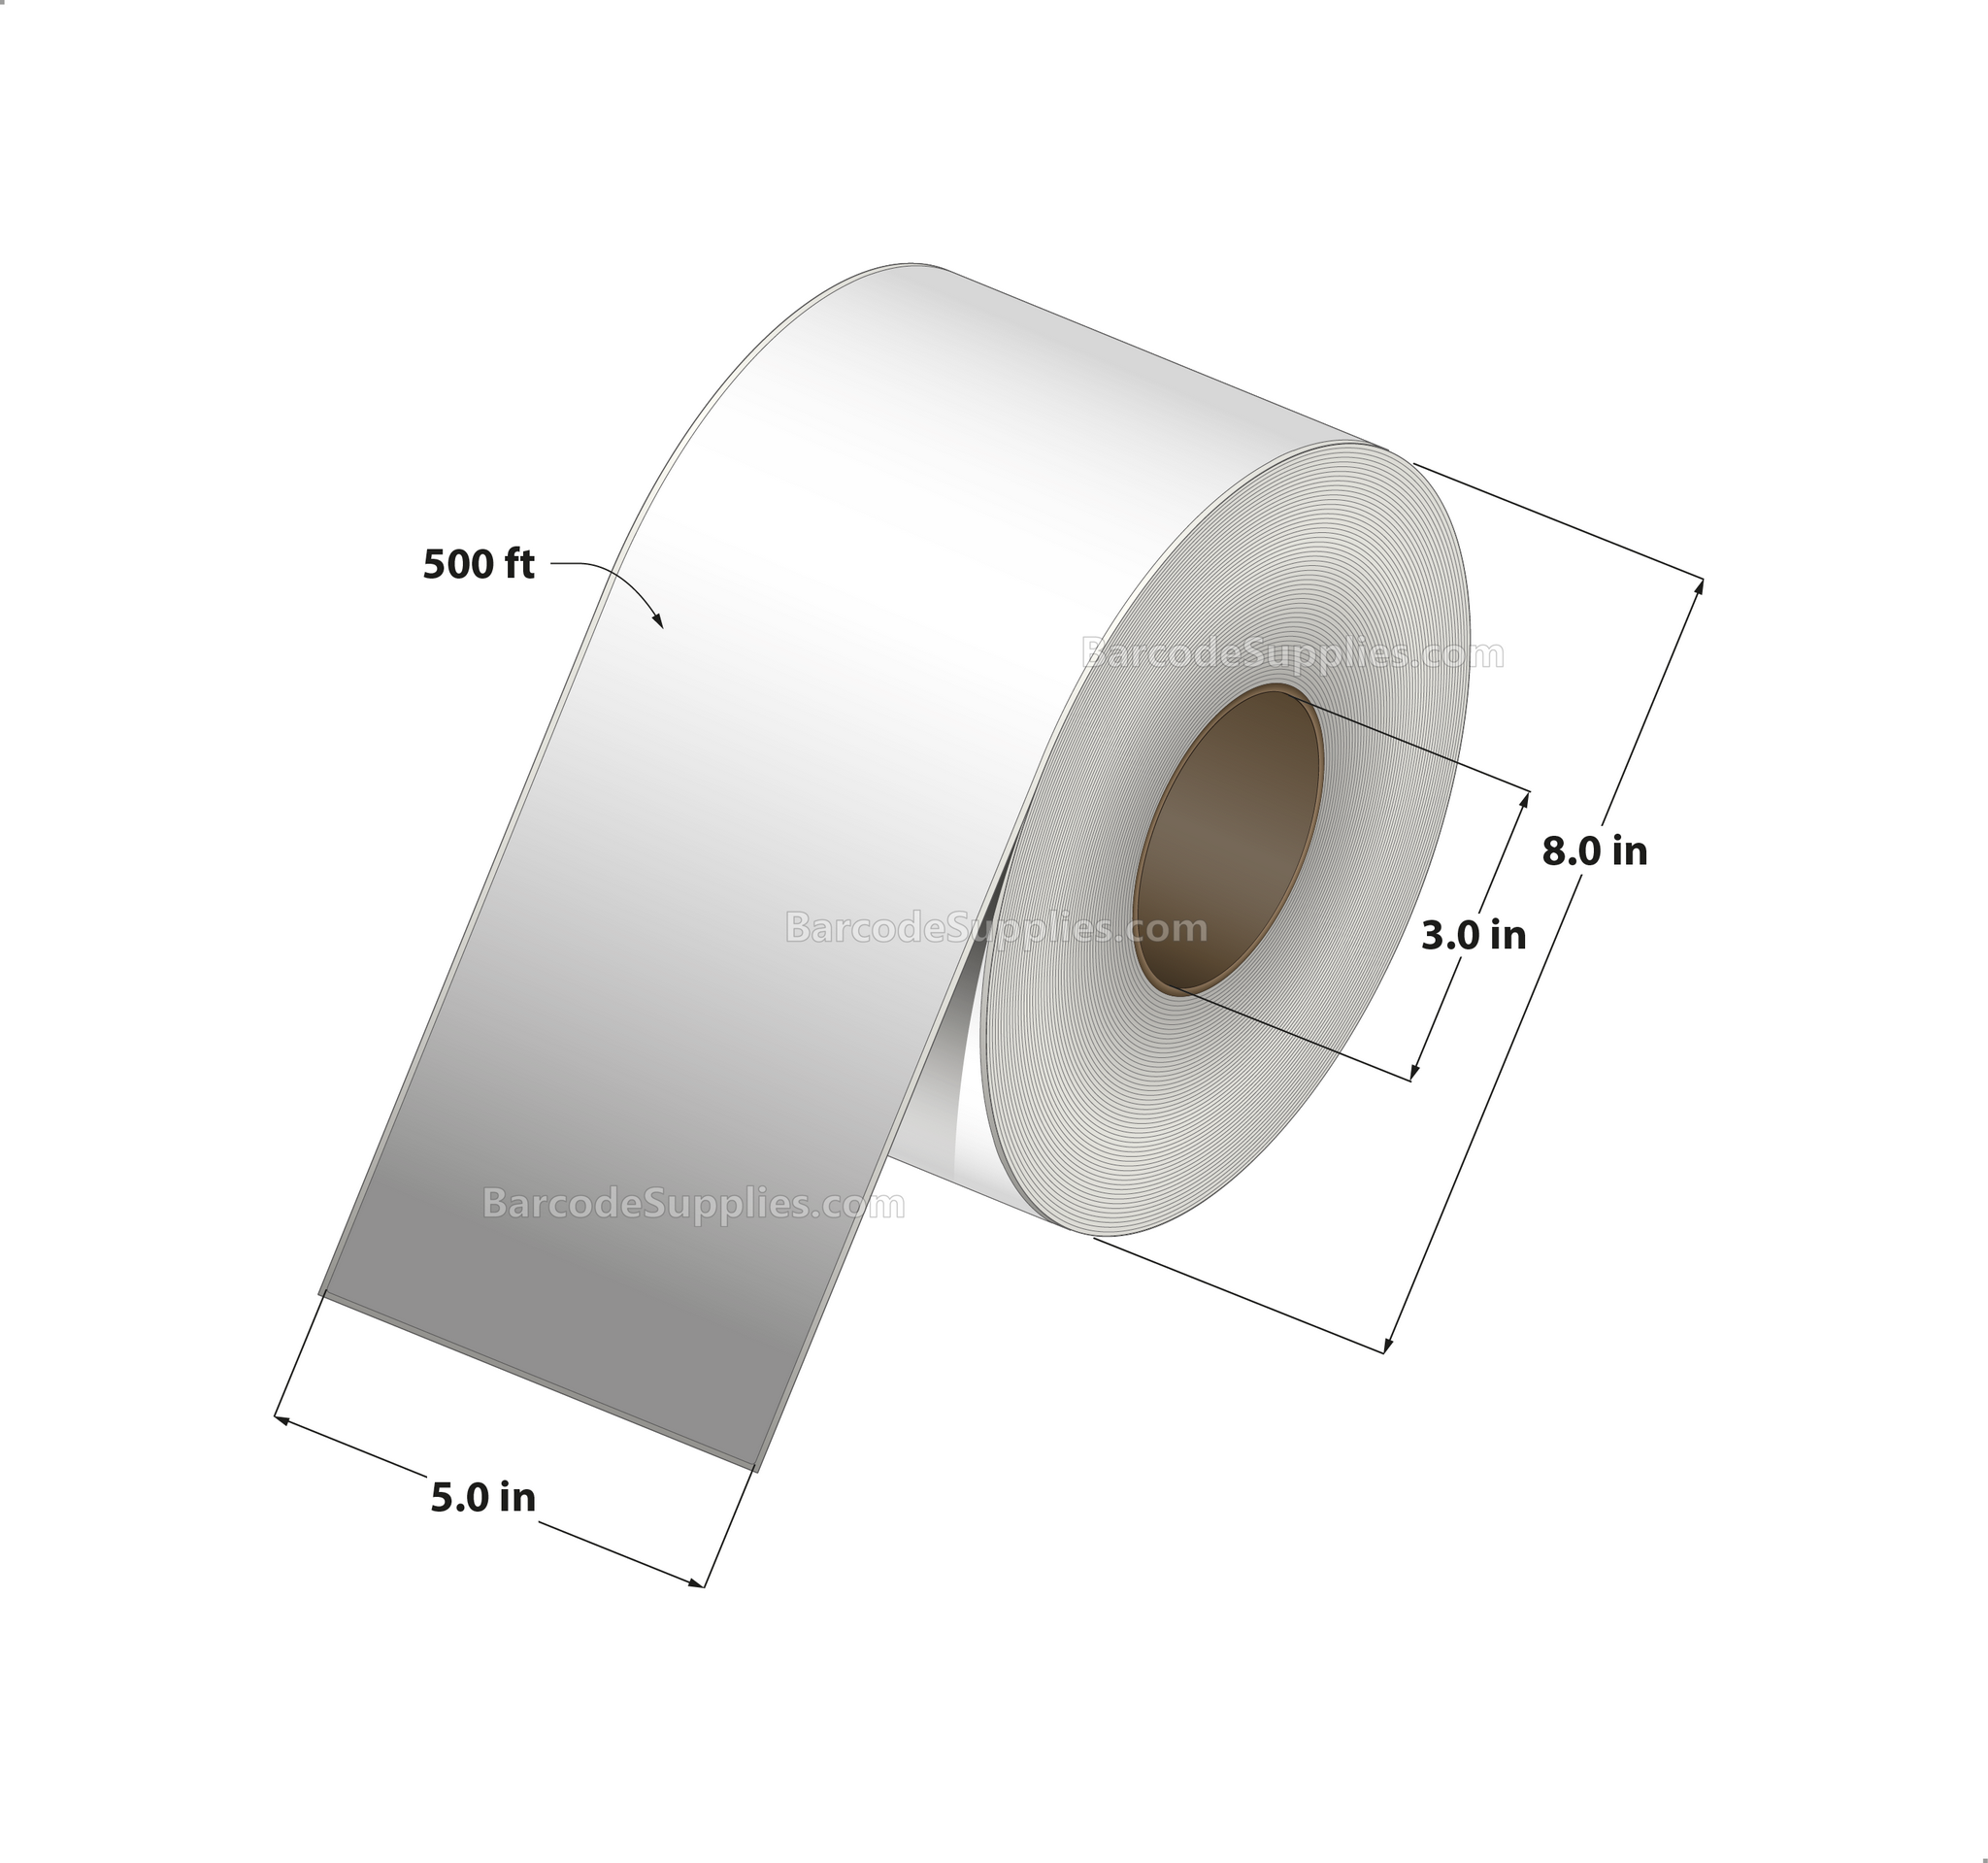 5 x 500' Thermal Transfer White Labels With Permanent Acrylic Adhesive - Not Perforated - 2000 Labels Per Roll - Carton Of 4 Rolls - 8000 Labels Total - MPN: TH4X500FT